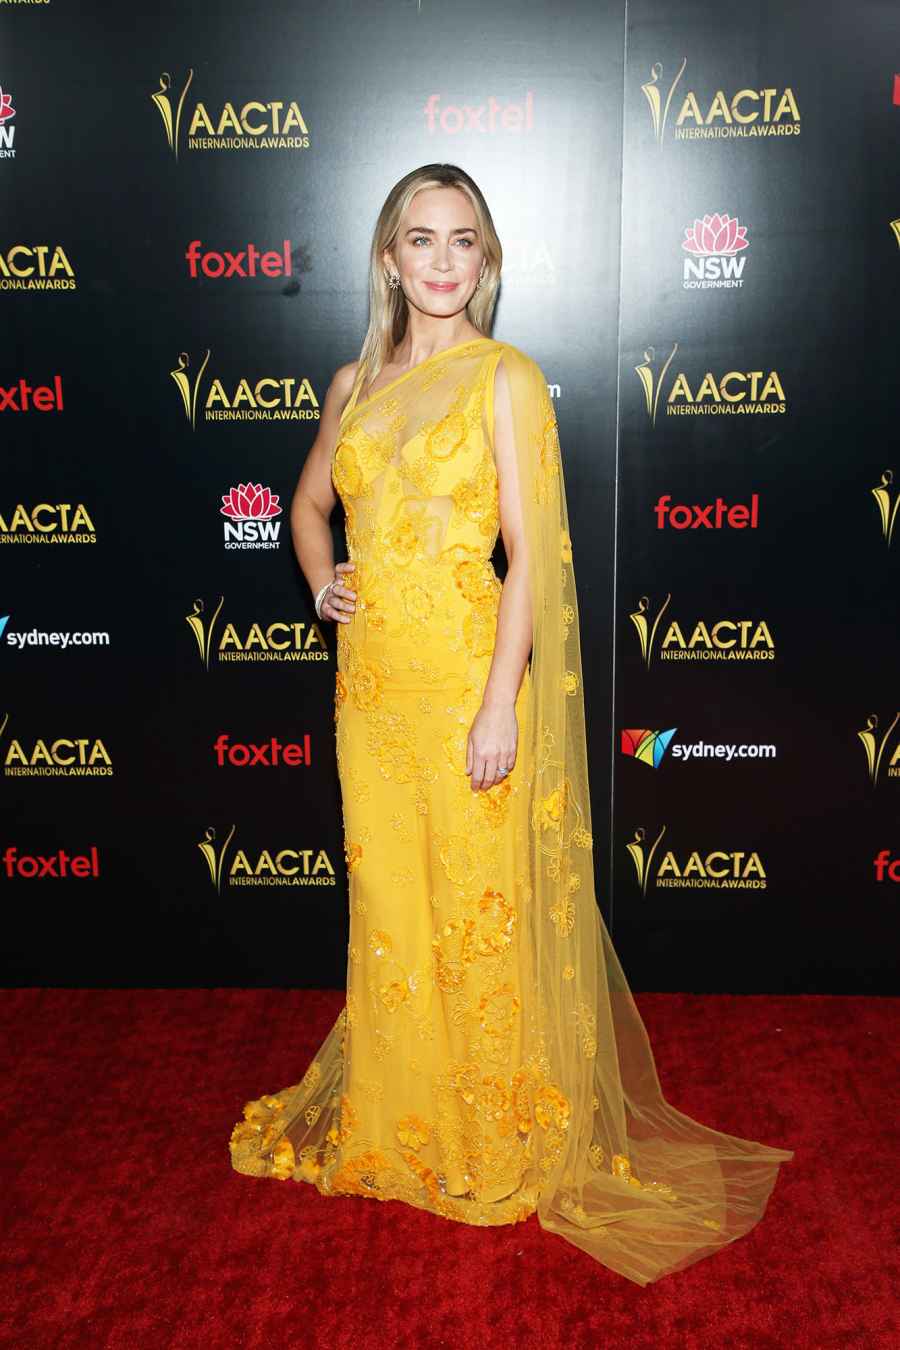 Emily Blunt attends the 8th AACTA International Awards